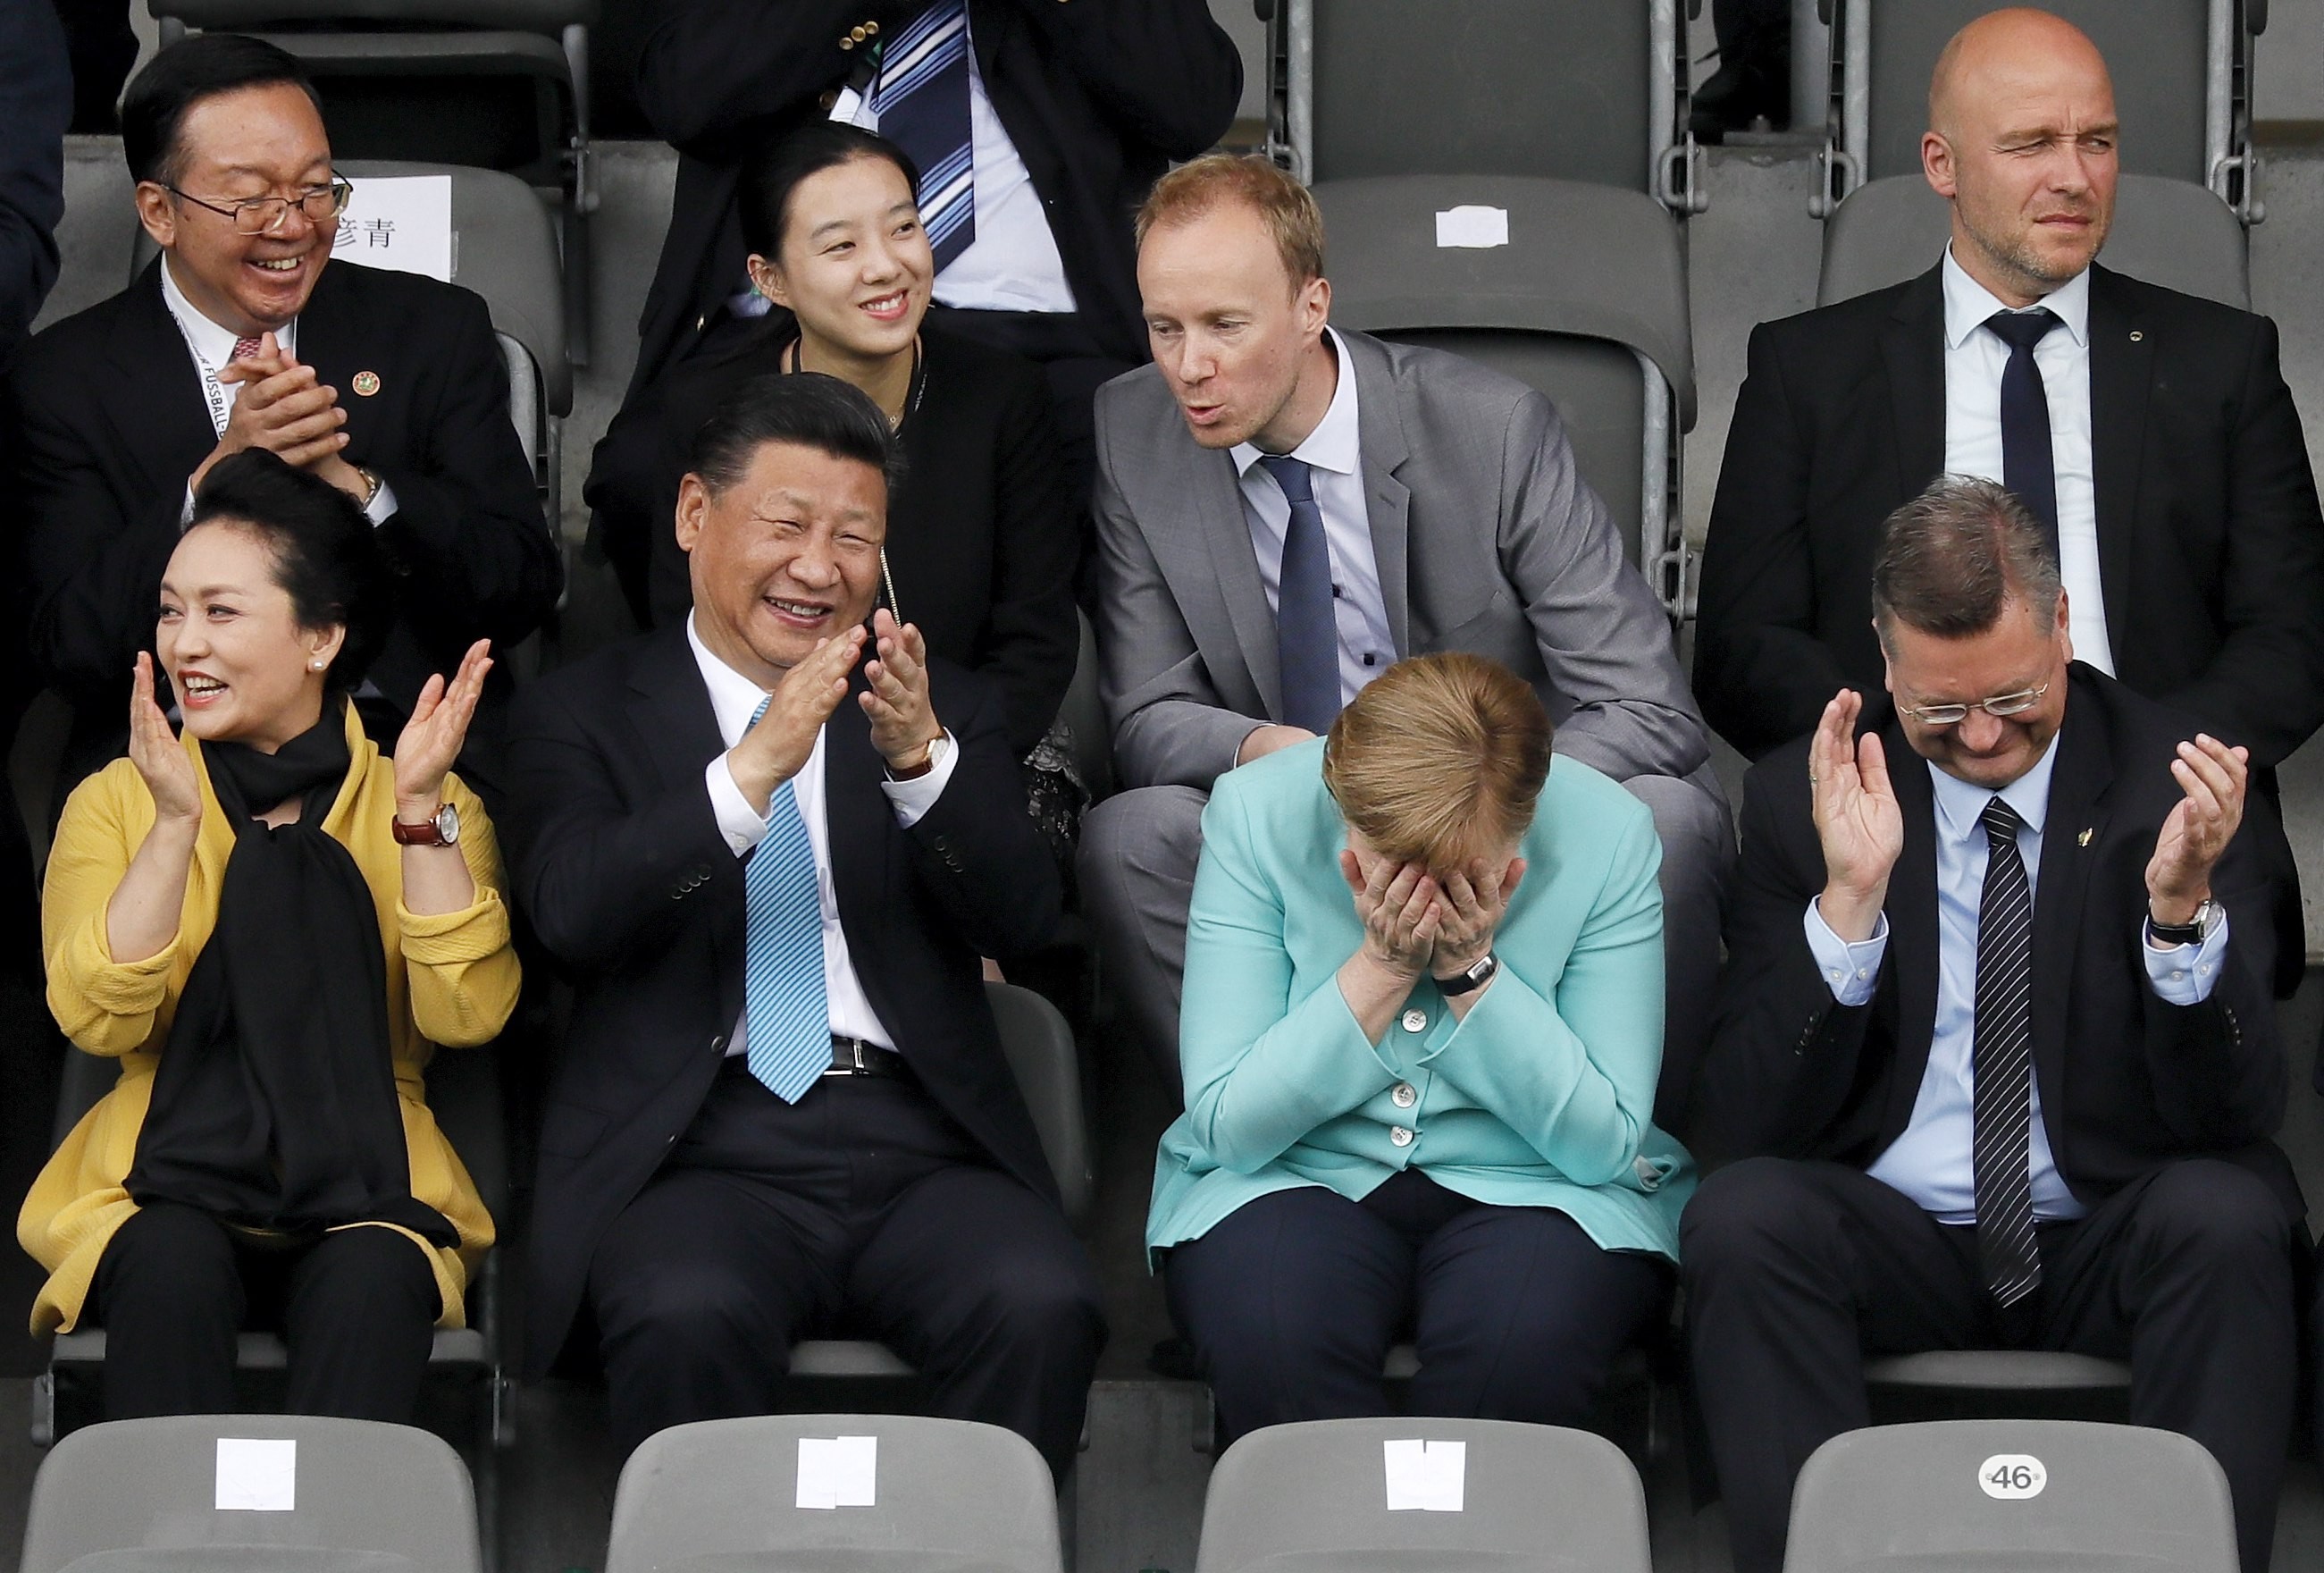 President Xi Jinping (second from left) and his wife Peng Liyuan (left) watch an under-12 soccer game with German Chancellor Angela Merkel (third from left), in Berlin last week. Xi’s love of the game is well known. Photo: EPA